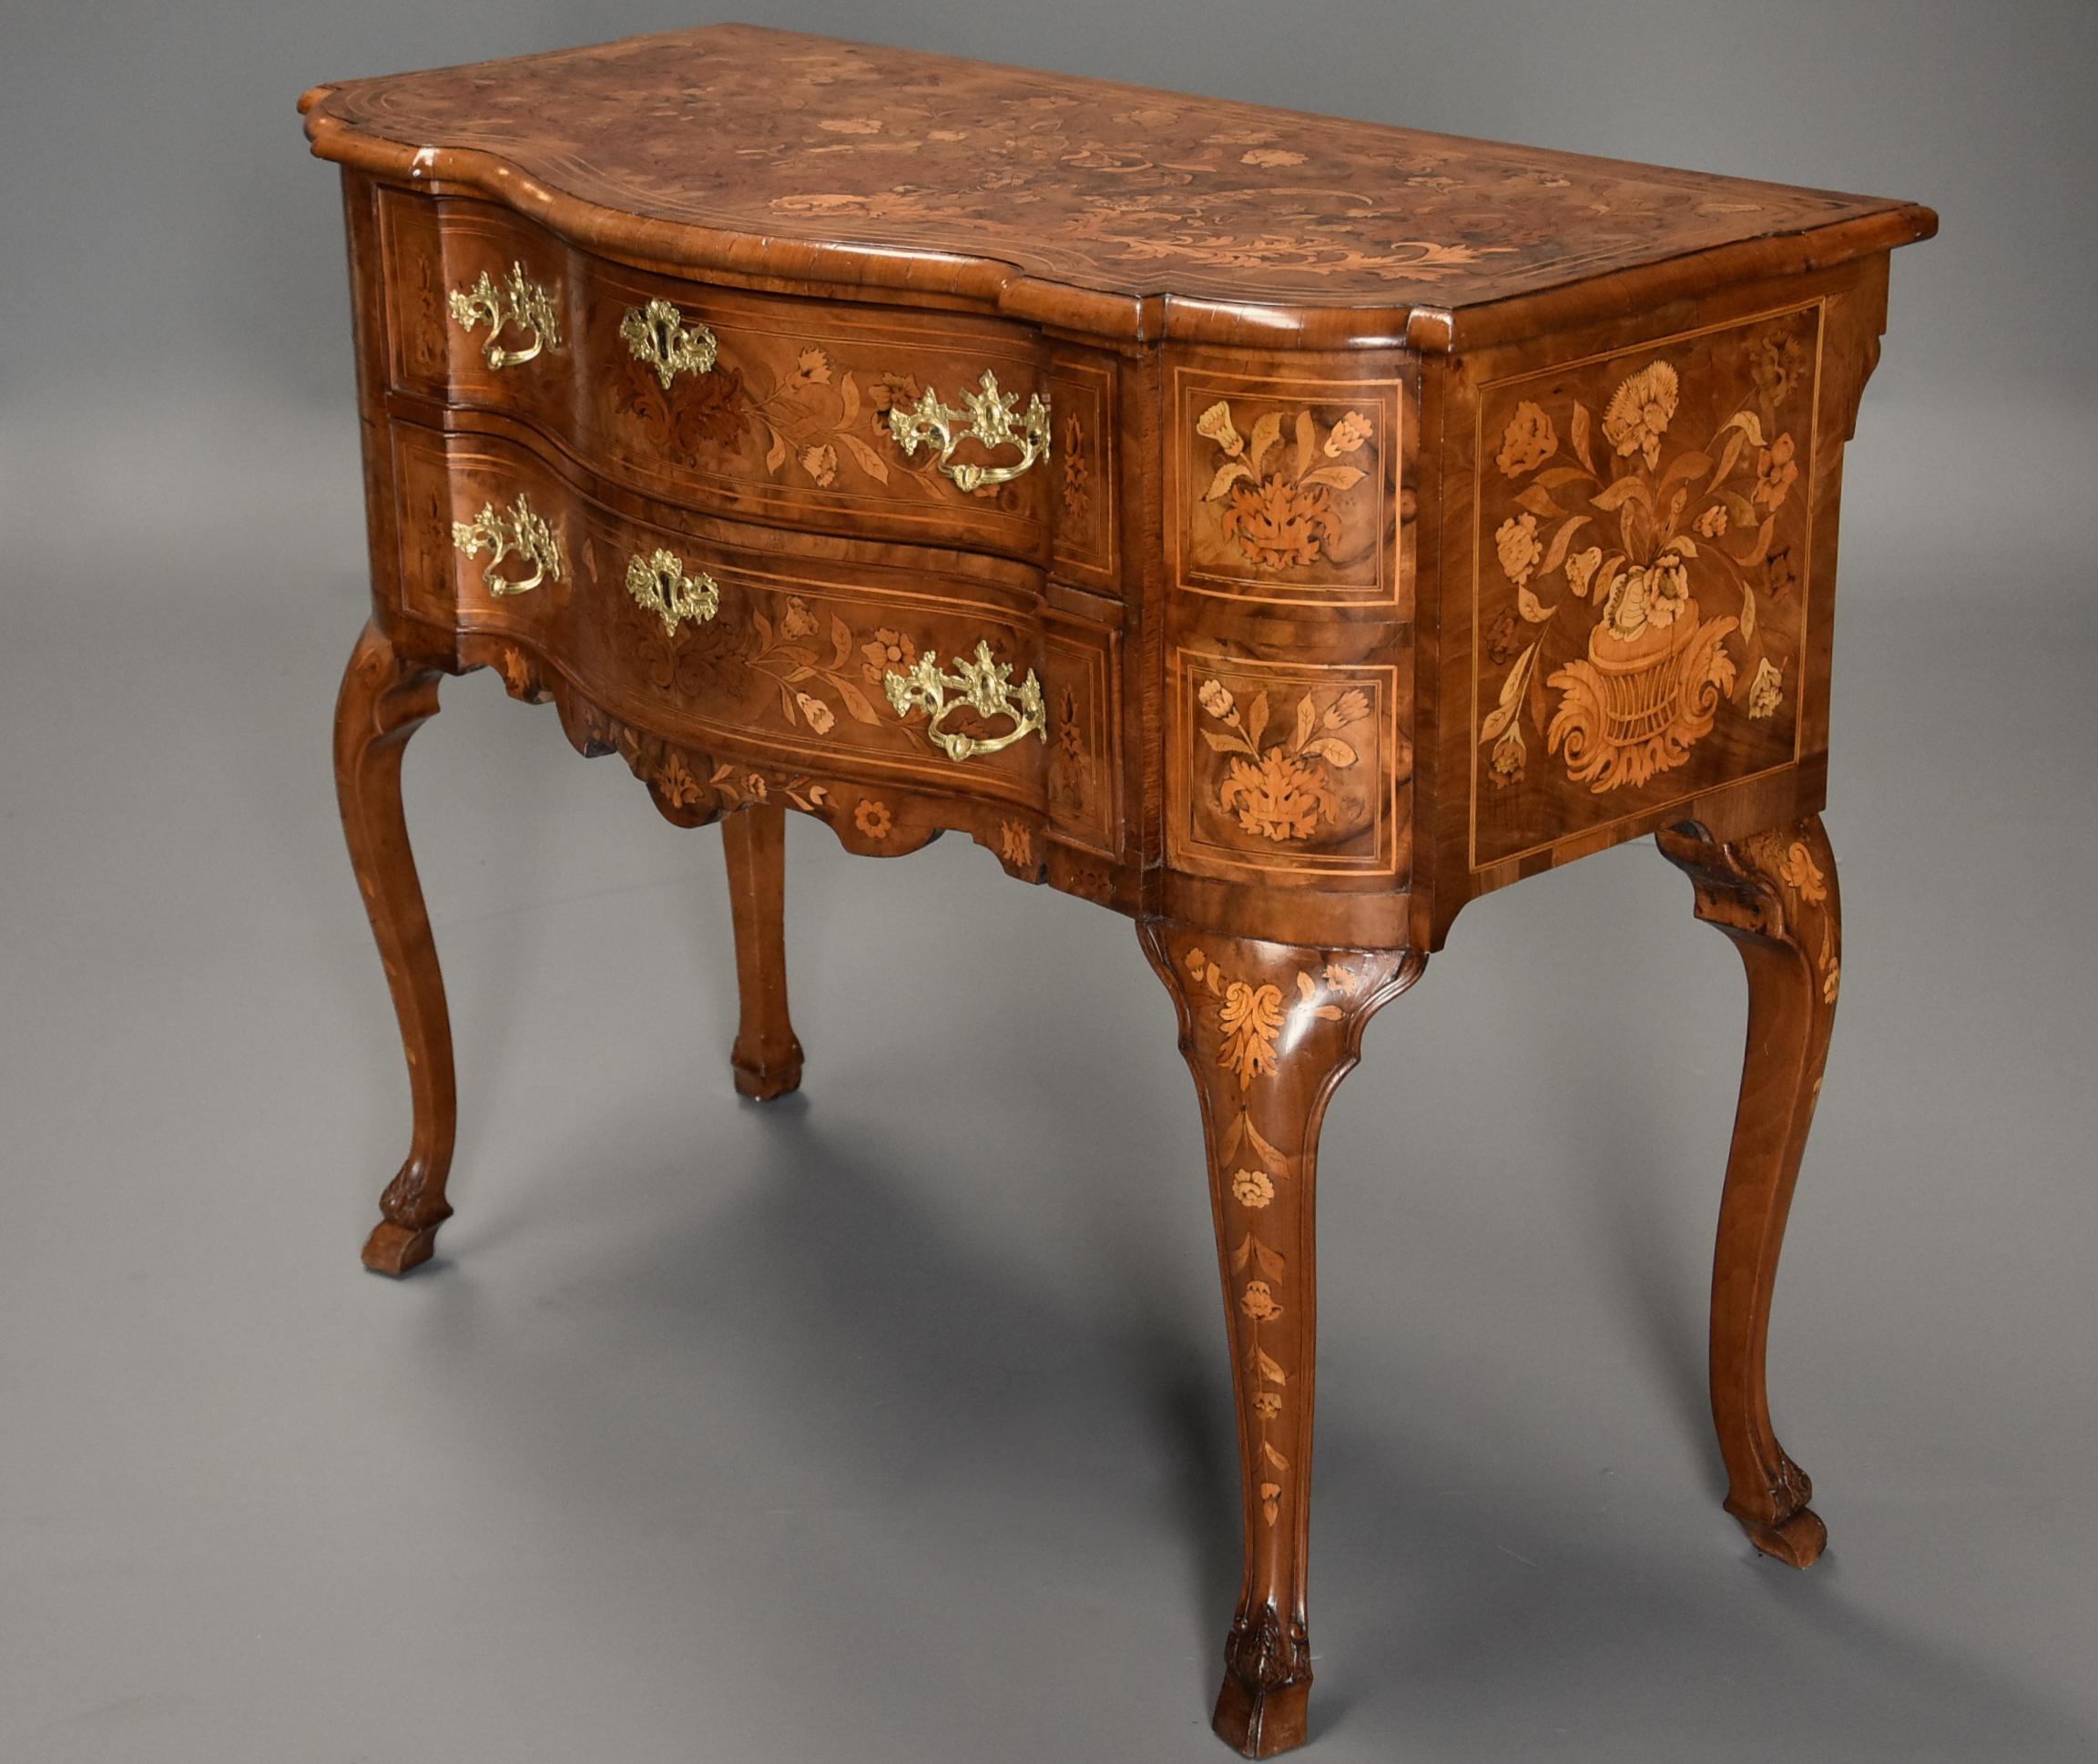 A fine quality mid-19th century floral marquetry walnut lowboy (or chest of drawers) of serpentine form.

This decorative piece consists of a burr walnut marquetry veneered serpentine shaped top inlaid with various woods including central urn with